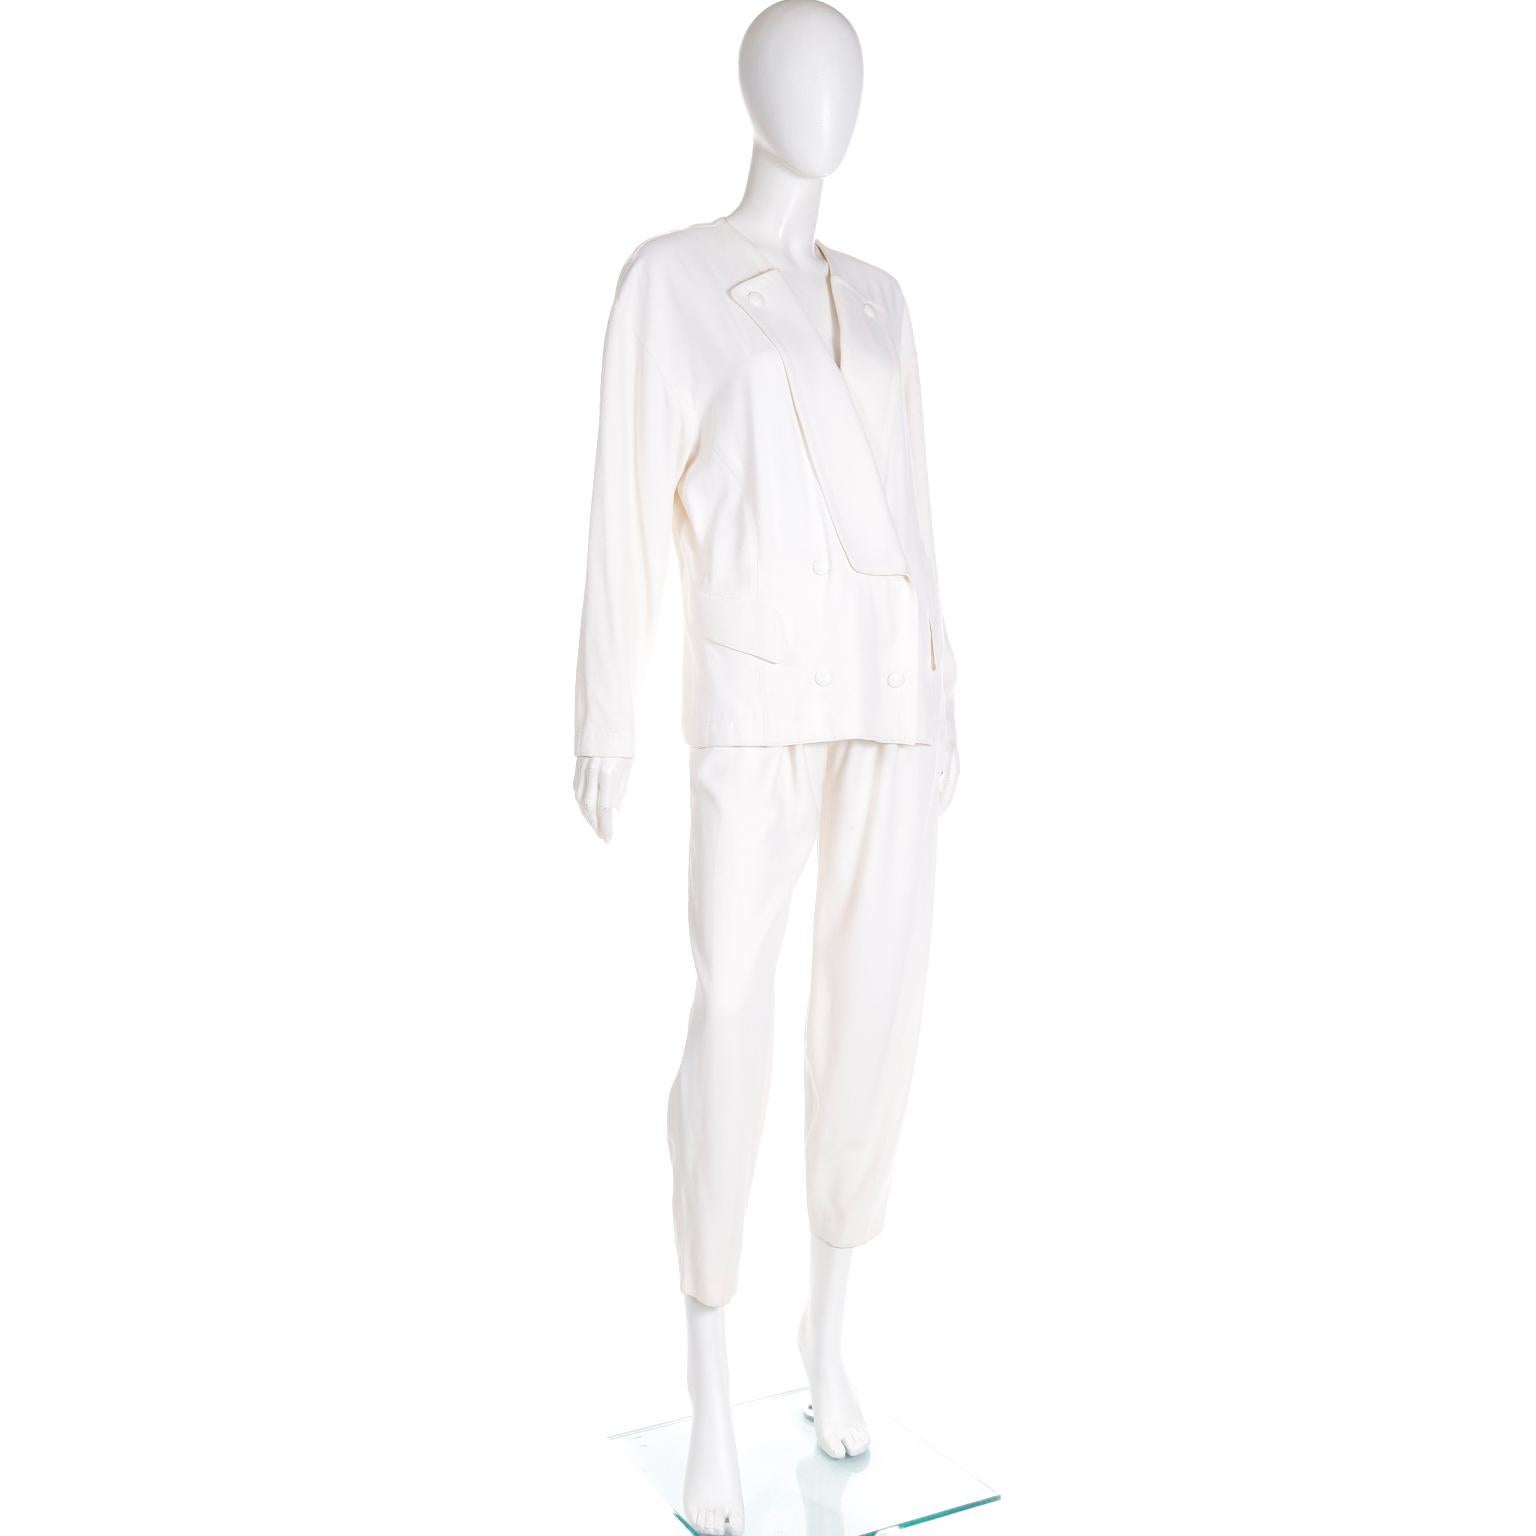 Thierry Mugler Vintage White 2 Pc Suit Jacket & Trousers Outfit  In Excellent Condition For Sale In Portland, OR